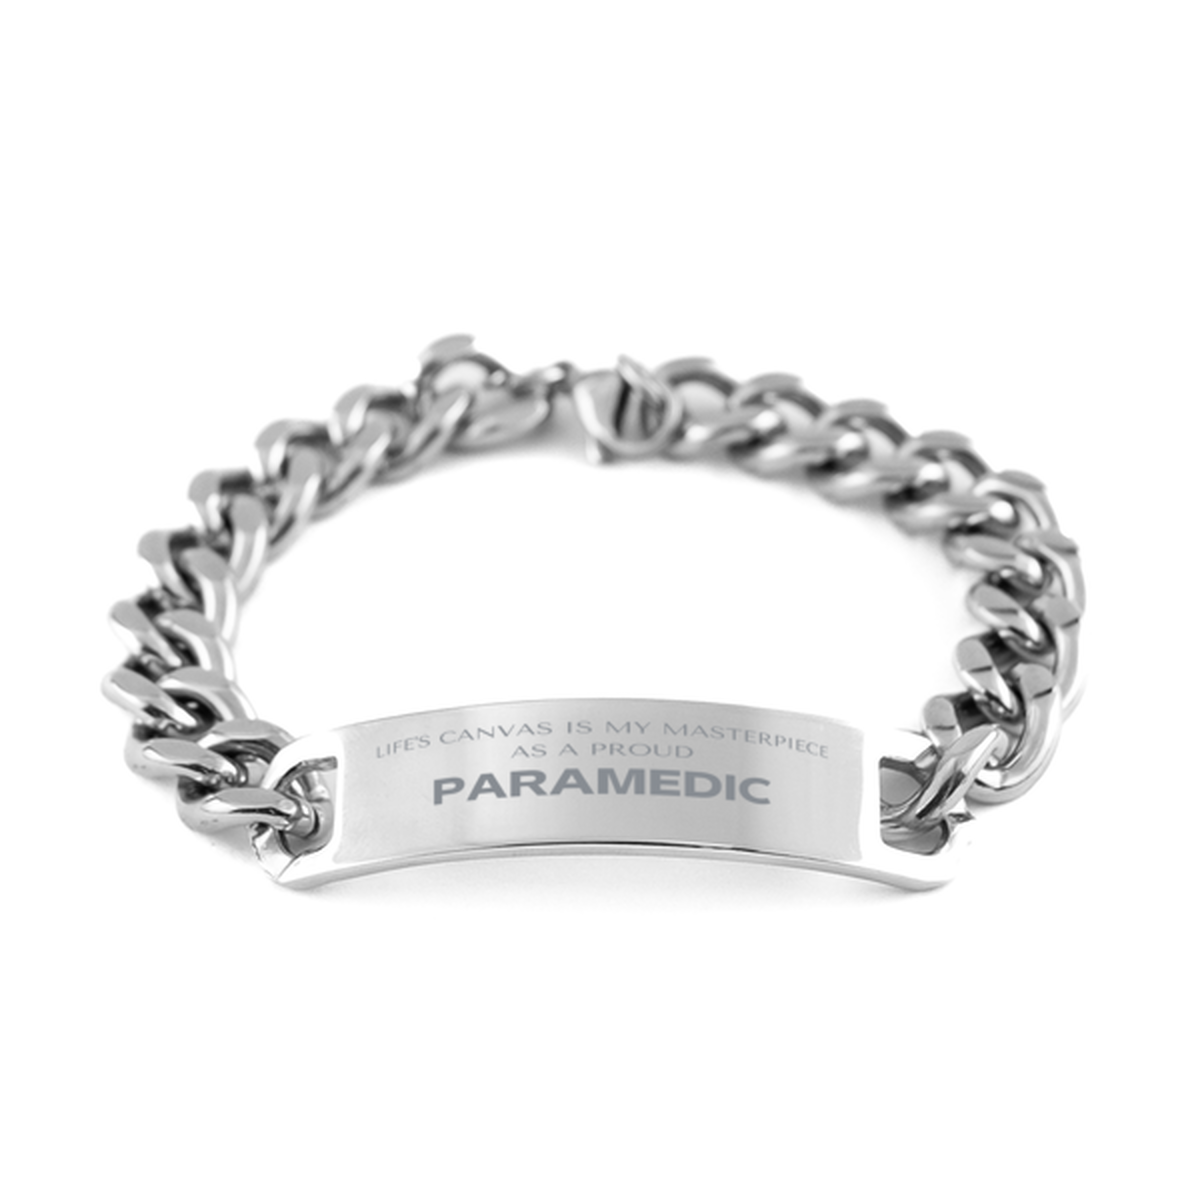 Proud Paramedic Gifts, Life's canvas is my masterpiece, Epic Birthday Christmas Unique Cuban Chain Stainless Steel Bracelet For Paramedic, Coworkers, Men, Women, Friends